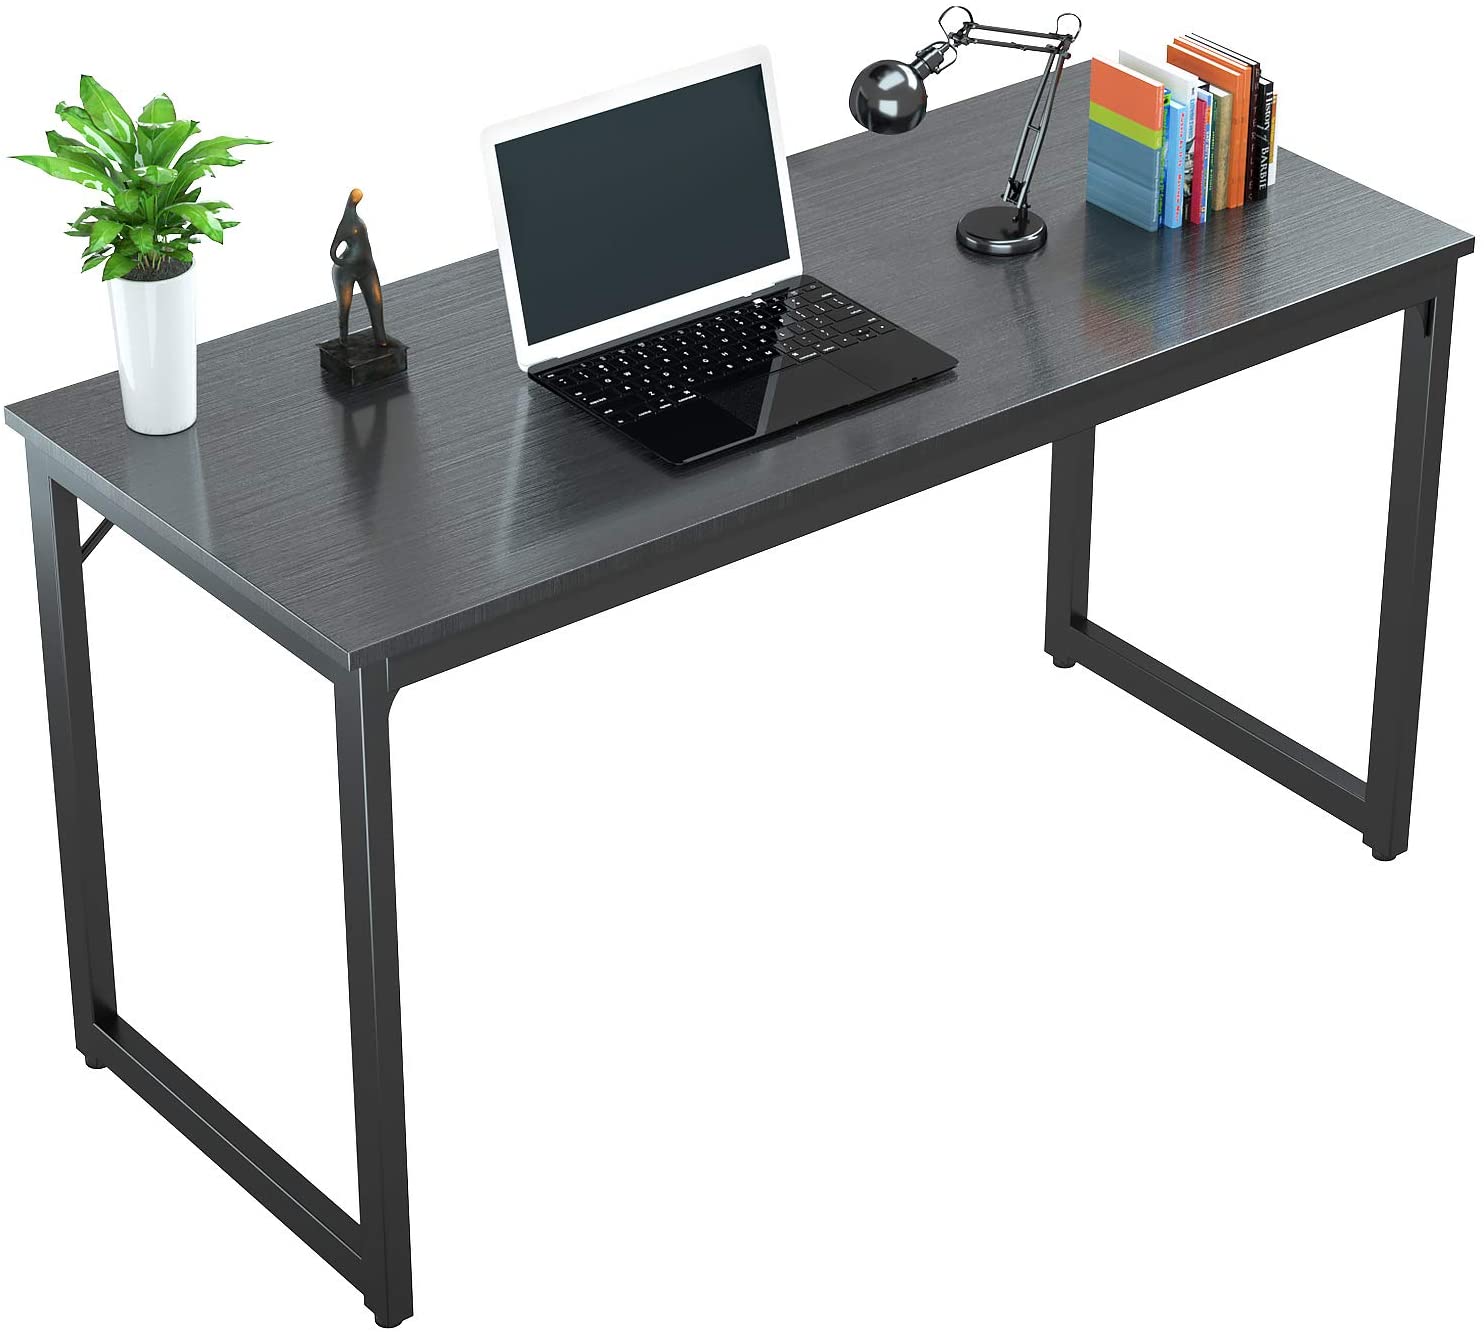 Foxemart Computer Desk 47” Modern Sturdy Office Desk PC Laptop Notebook Study Writing Table for Home Office Workstation, Black